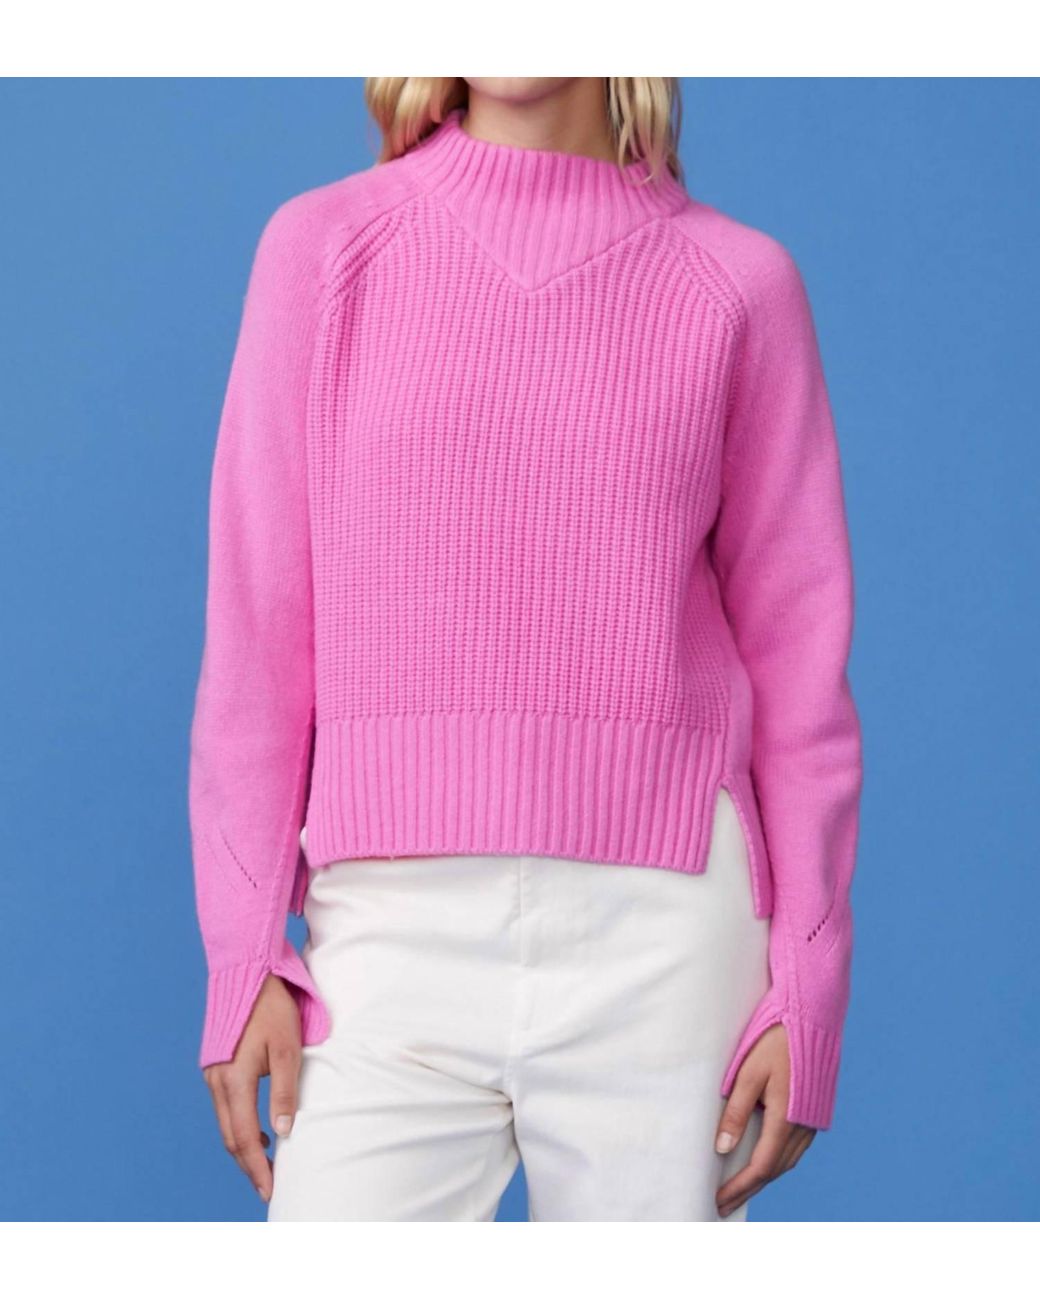 Monrow Wool Cashmere Mock Neck Sweater In Dragon Fruit in Pink | Lyst